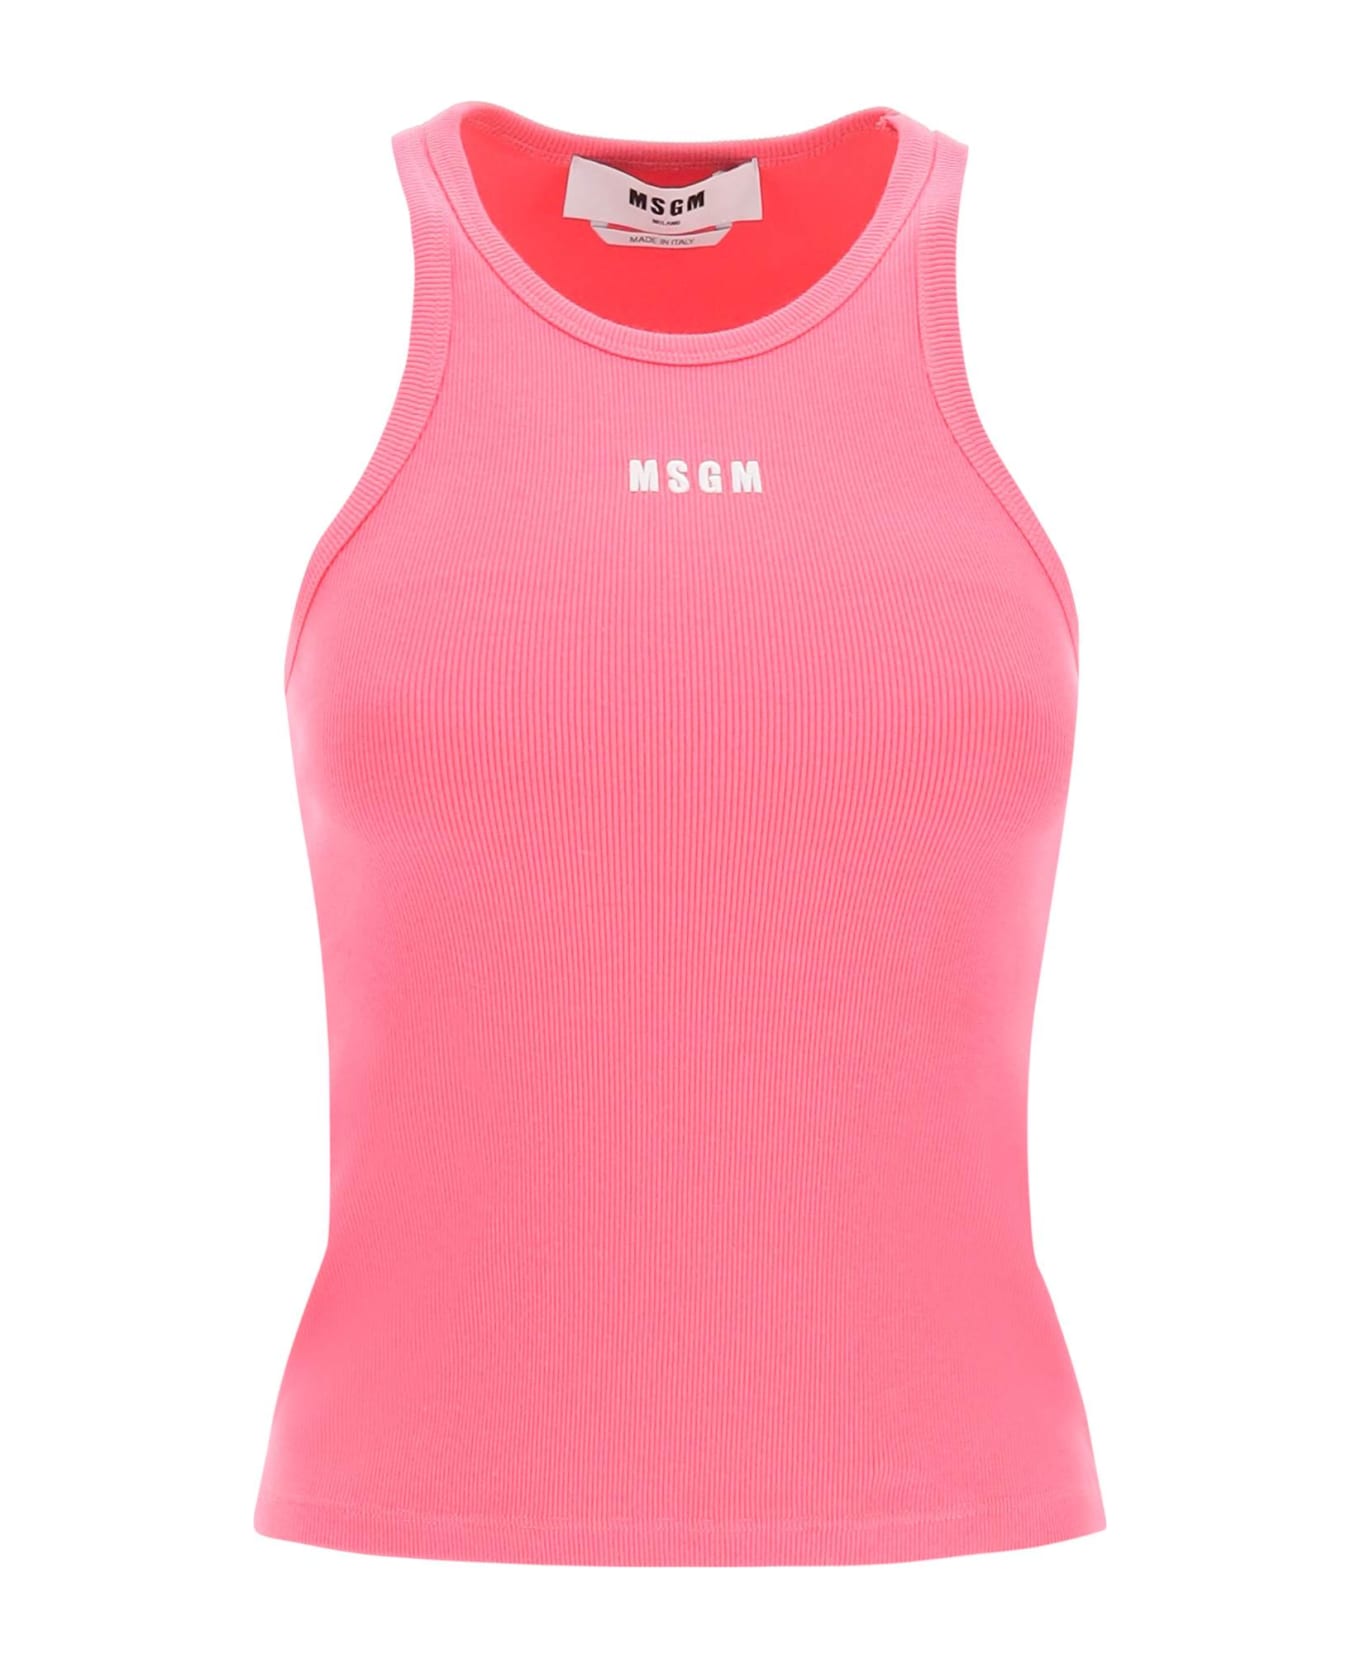 MSGM Logo Embroidery Tank Top - HOT PINK (Pink) タンクトップ